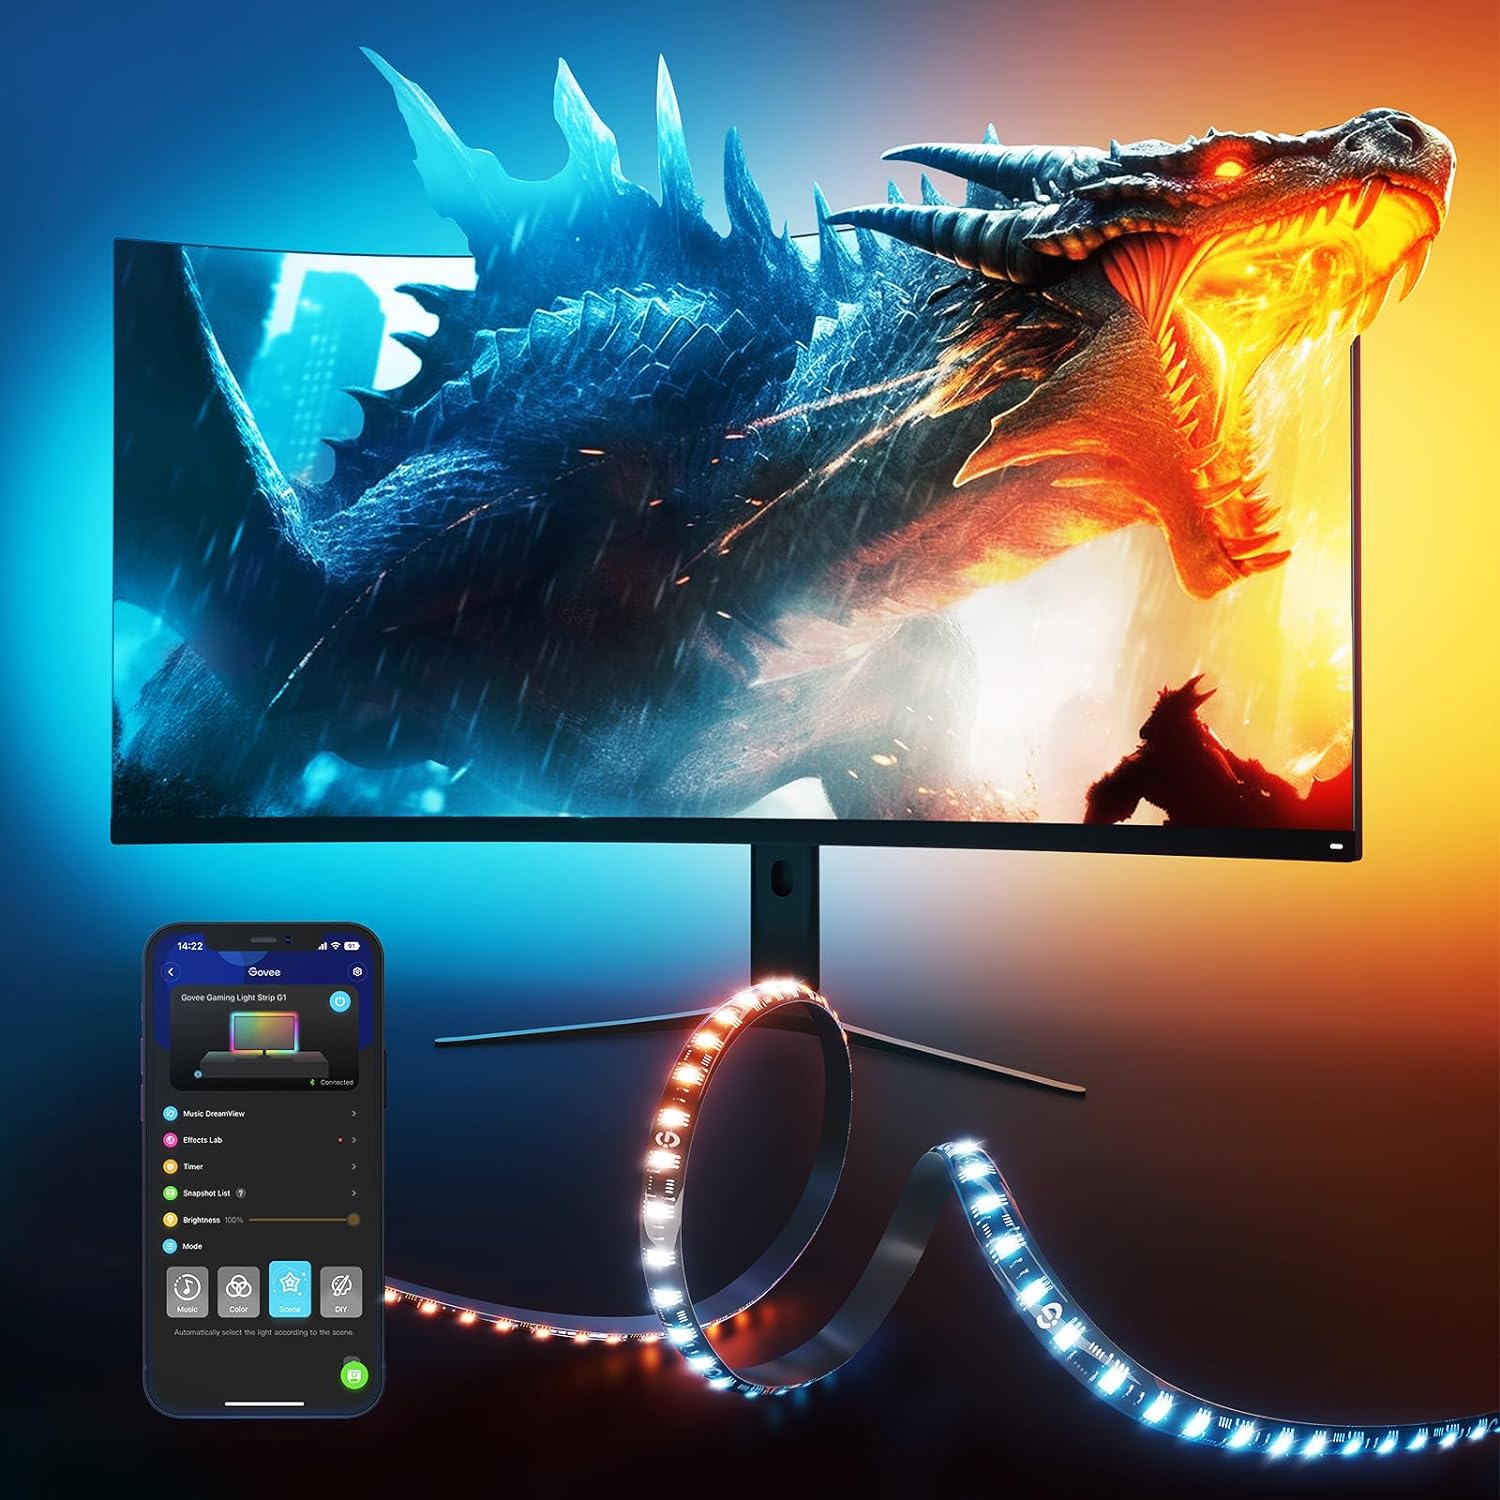 Govee Gaming Light Strip G1 Monitor Backlight for 27-34 Inch PC, Smart RGBIC WiFi LED Lights for Monitors with Color Matching, Adapts to Curved Monitors, Double Strip Light Beads with 123 Scene Modes